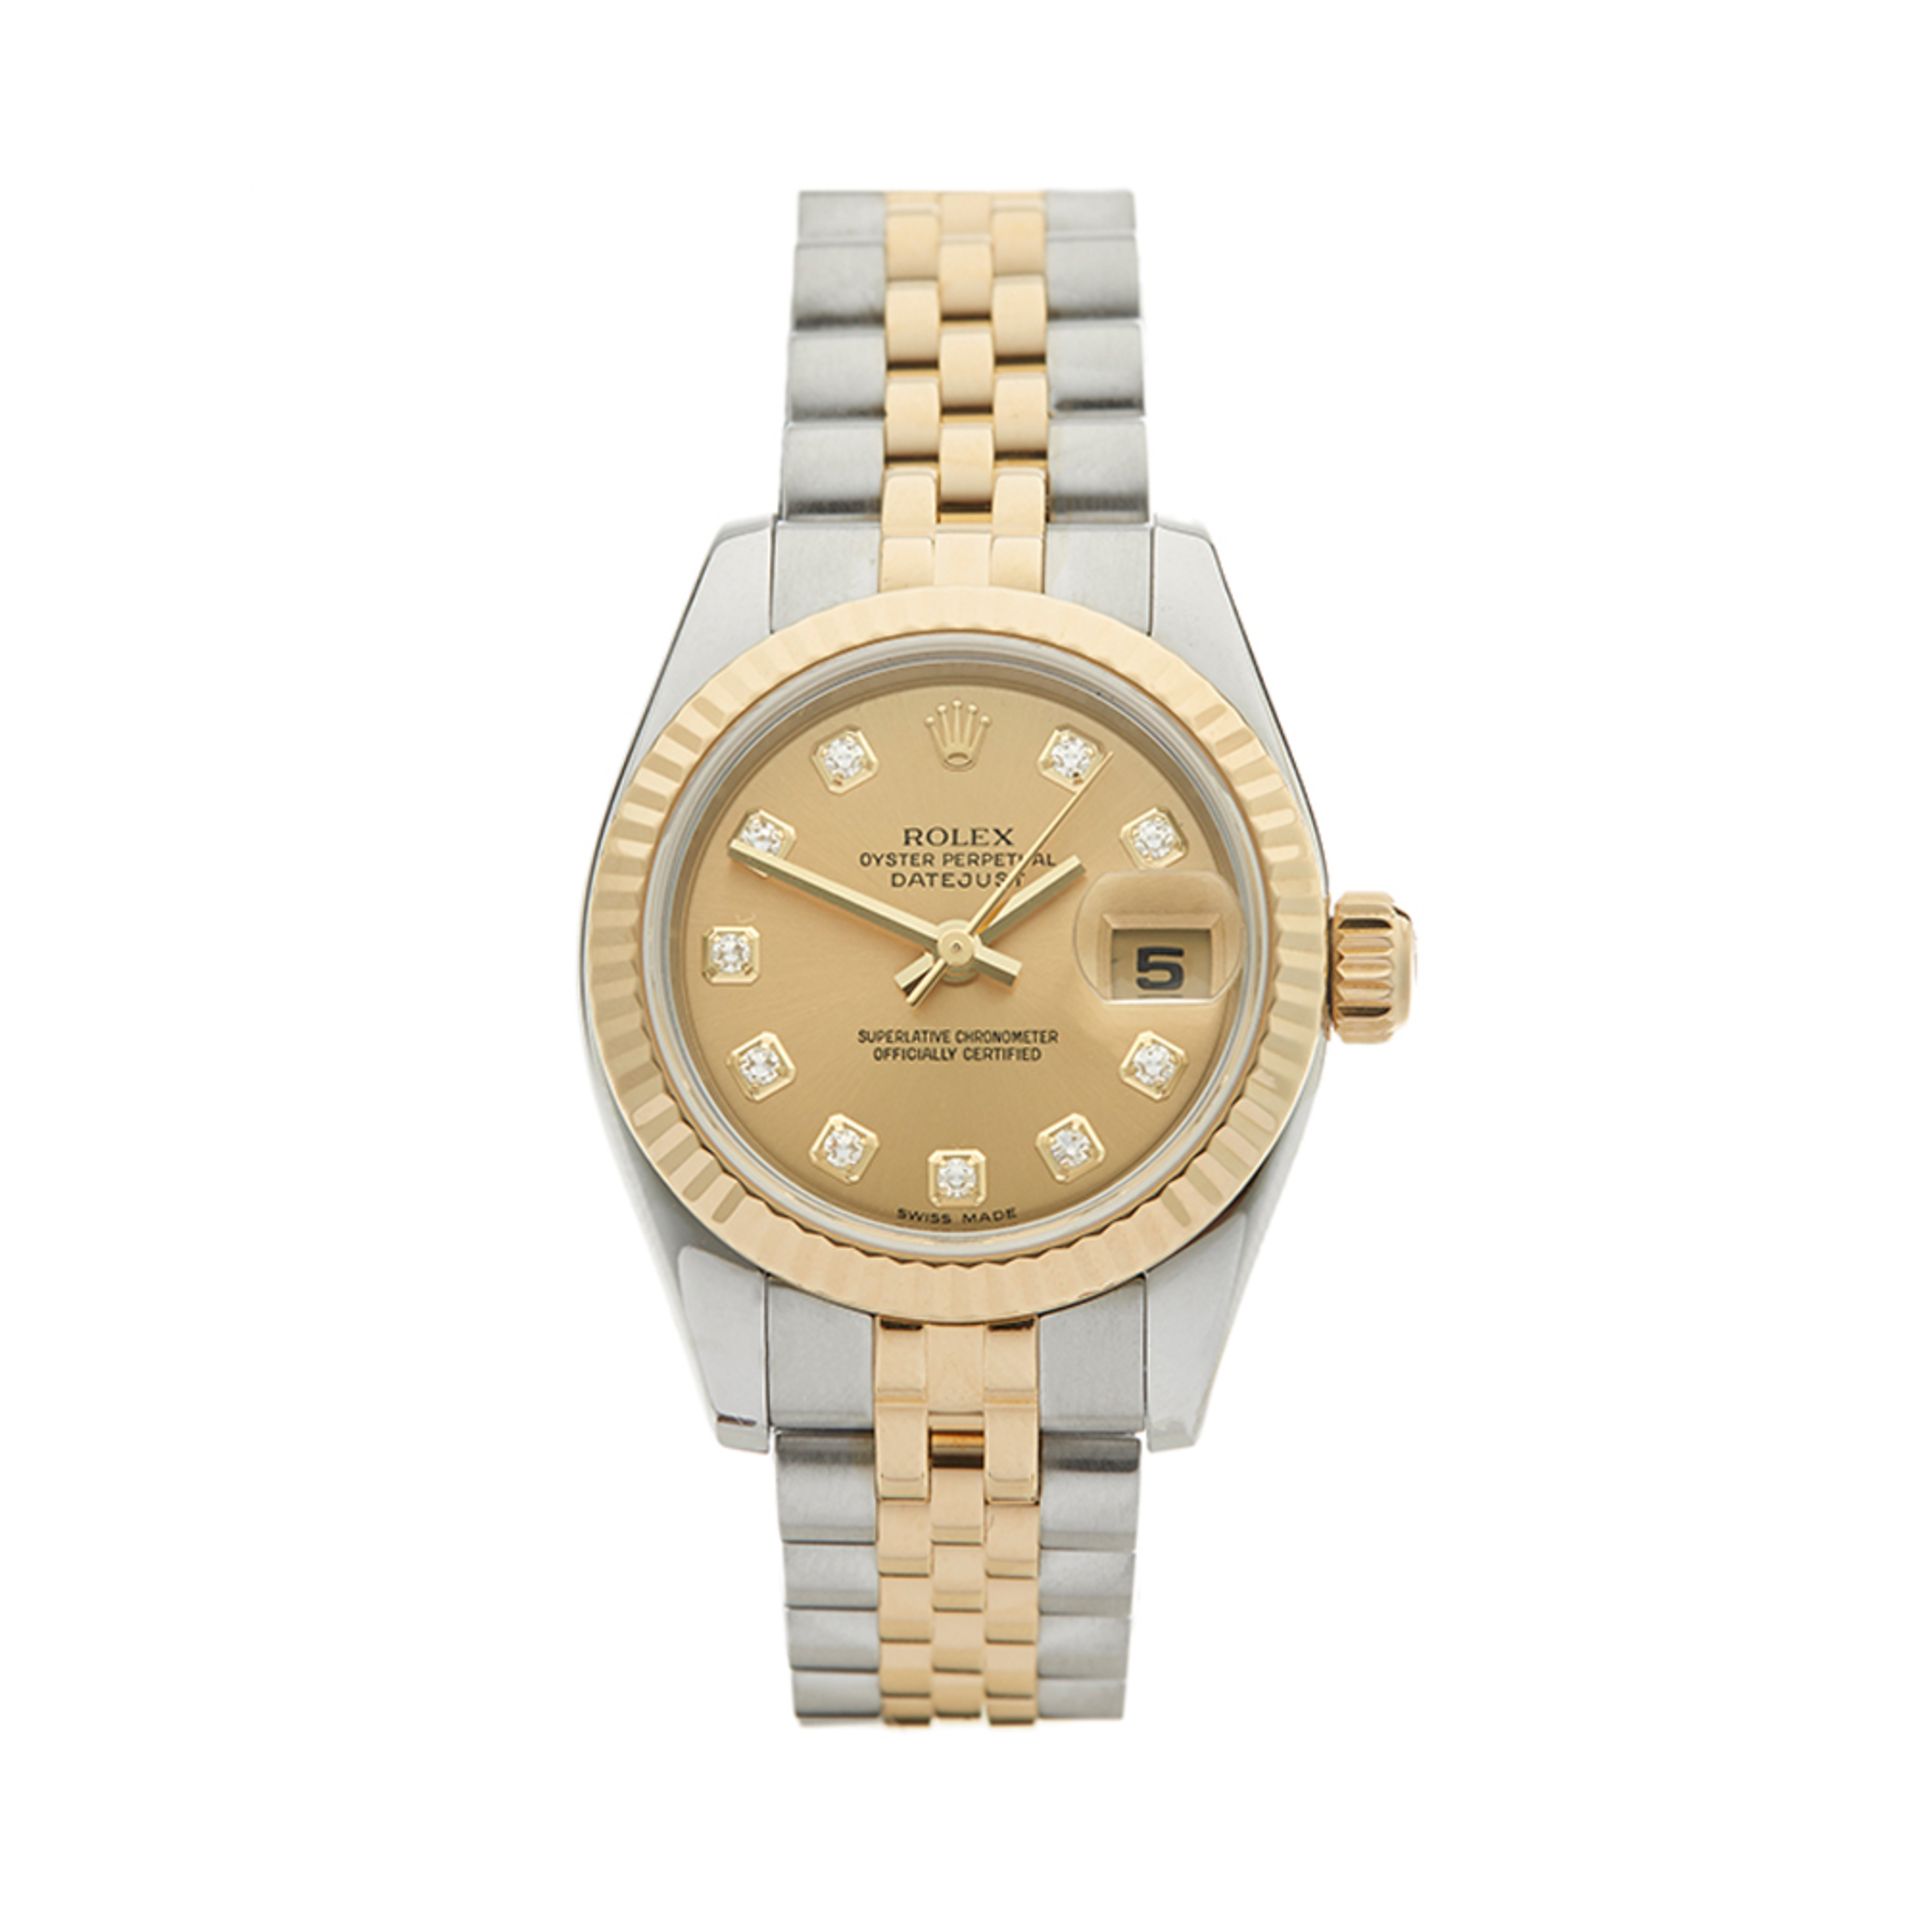 2005 Rolex DateJust 26 Diamond 18k Stainless Steel & Yellow Gold - 179173 - Image 7 of 7